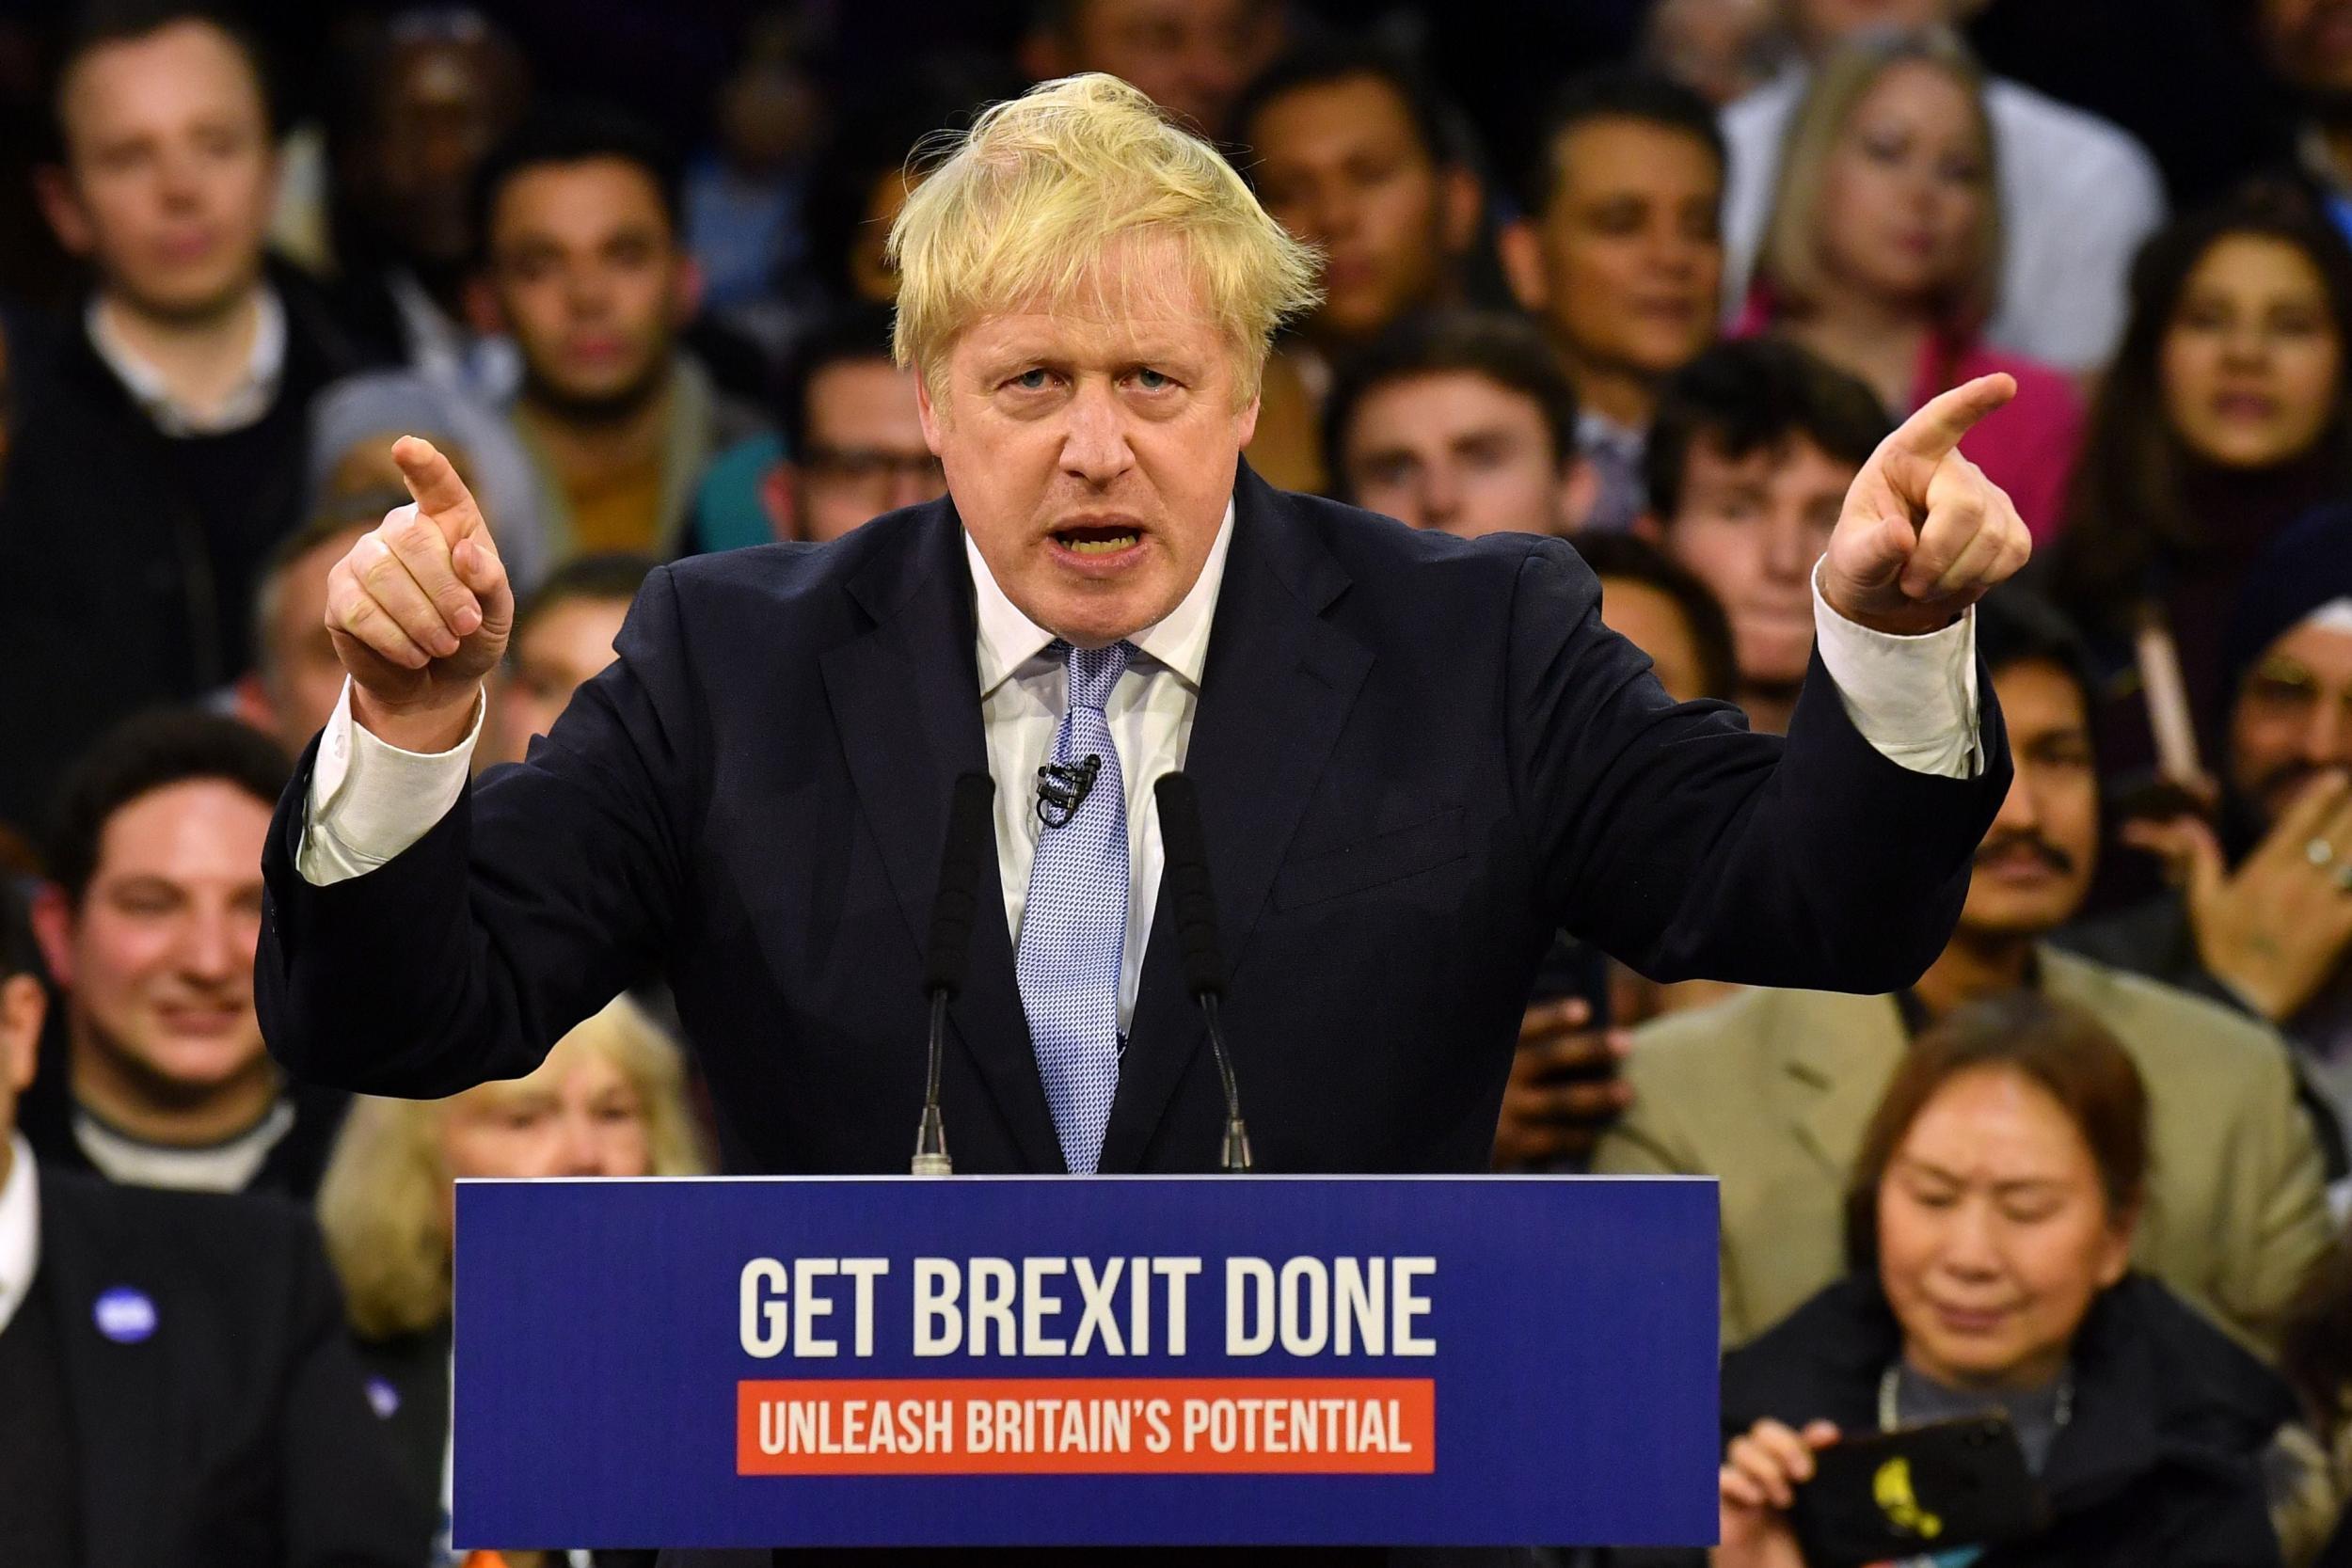 Johnson campaigns during the general election to get Brexit done